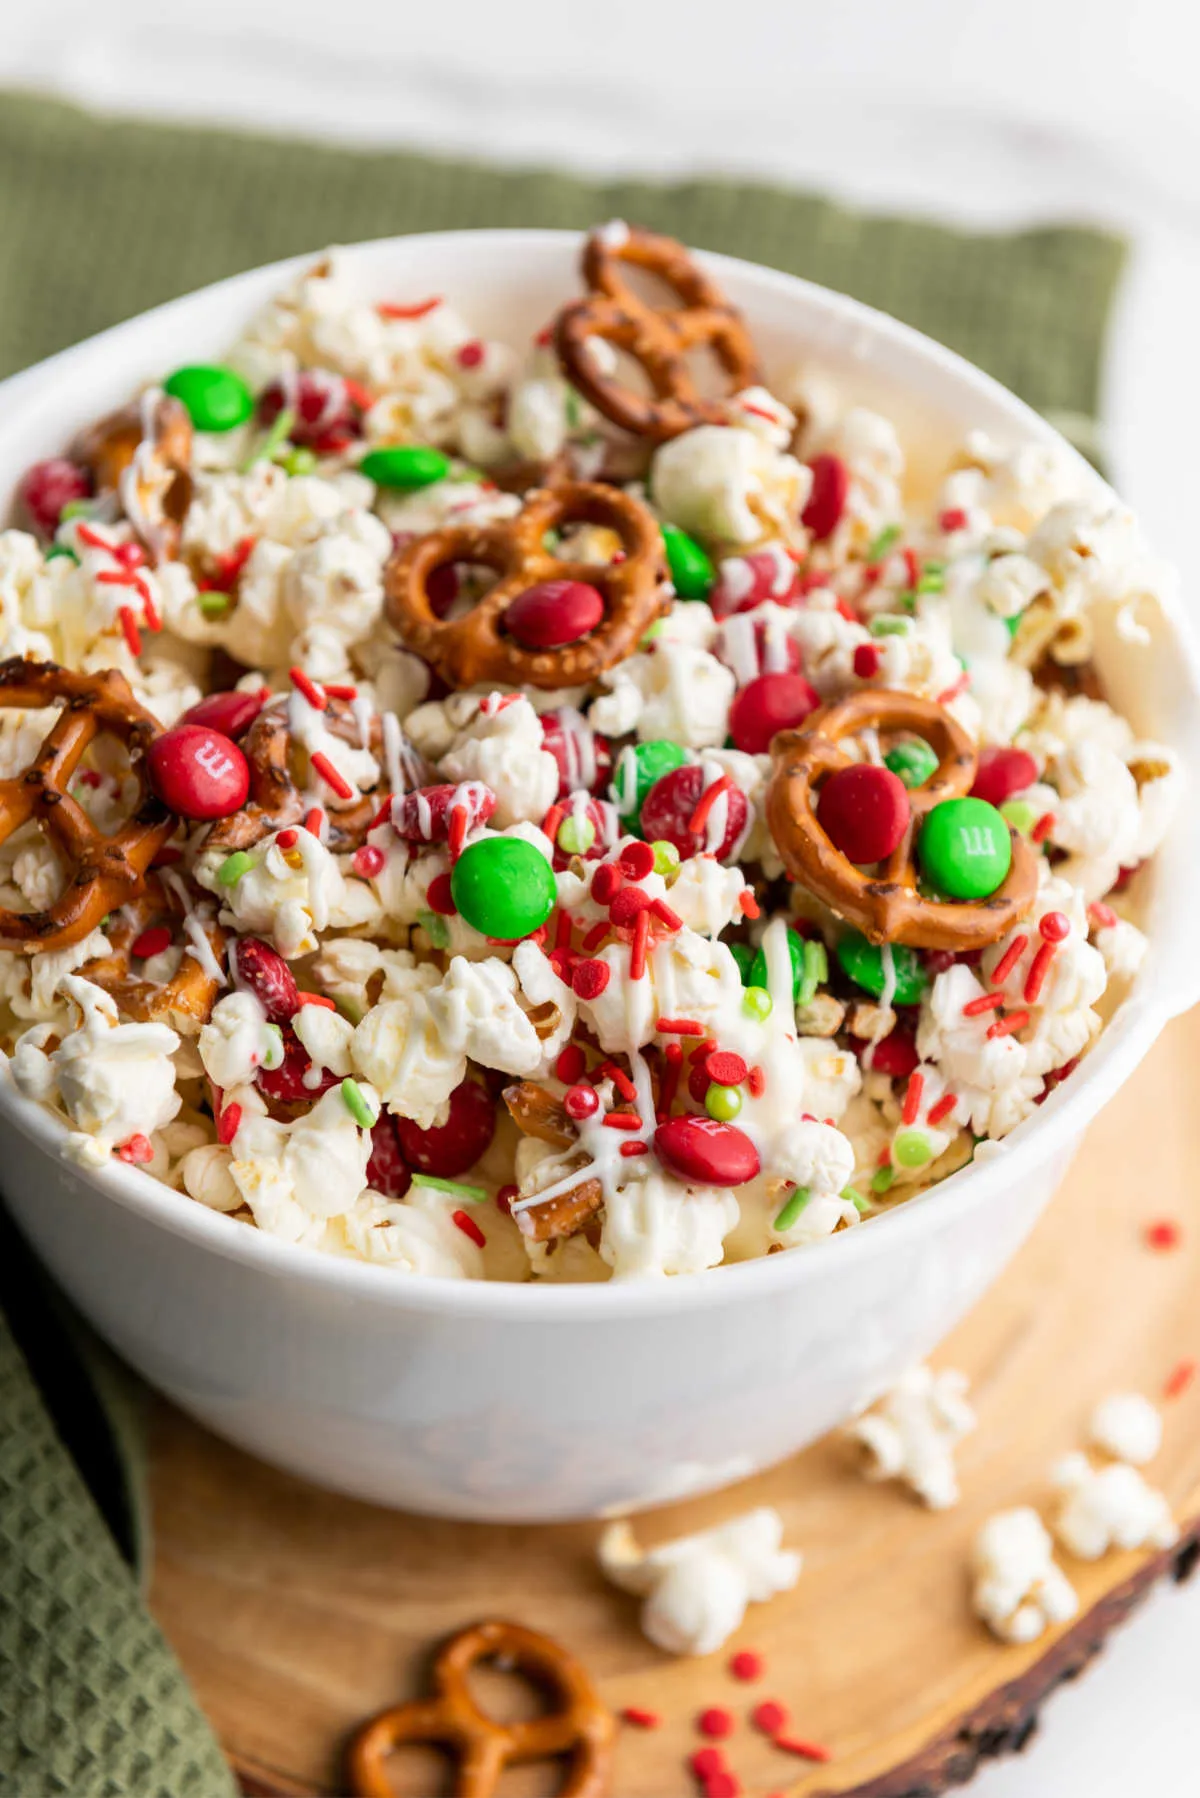 Big white serving bowl filled with sweet and salty Christmas crunch snack mix.